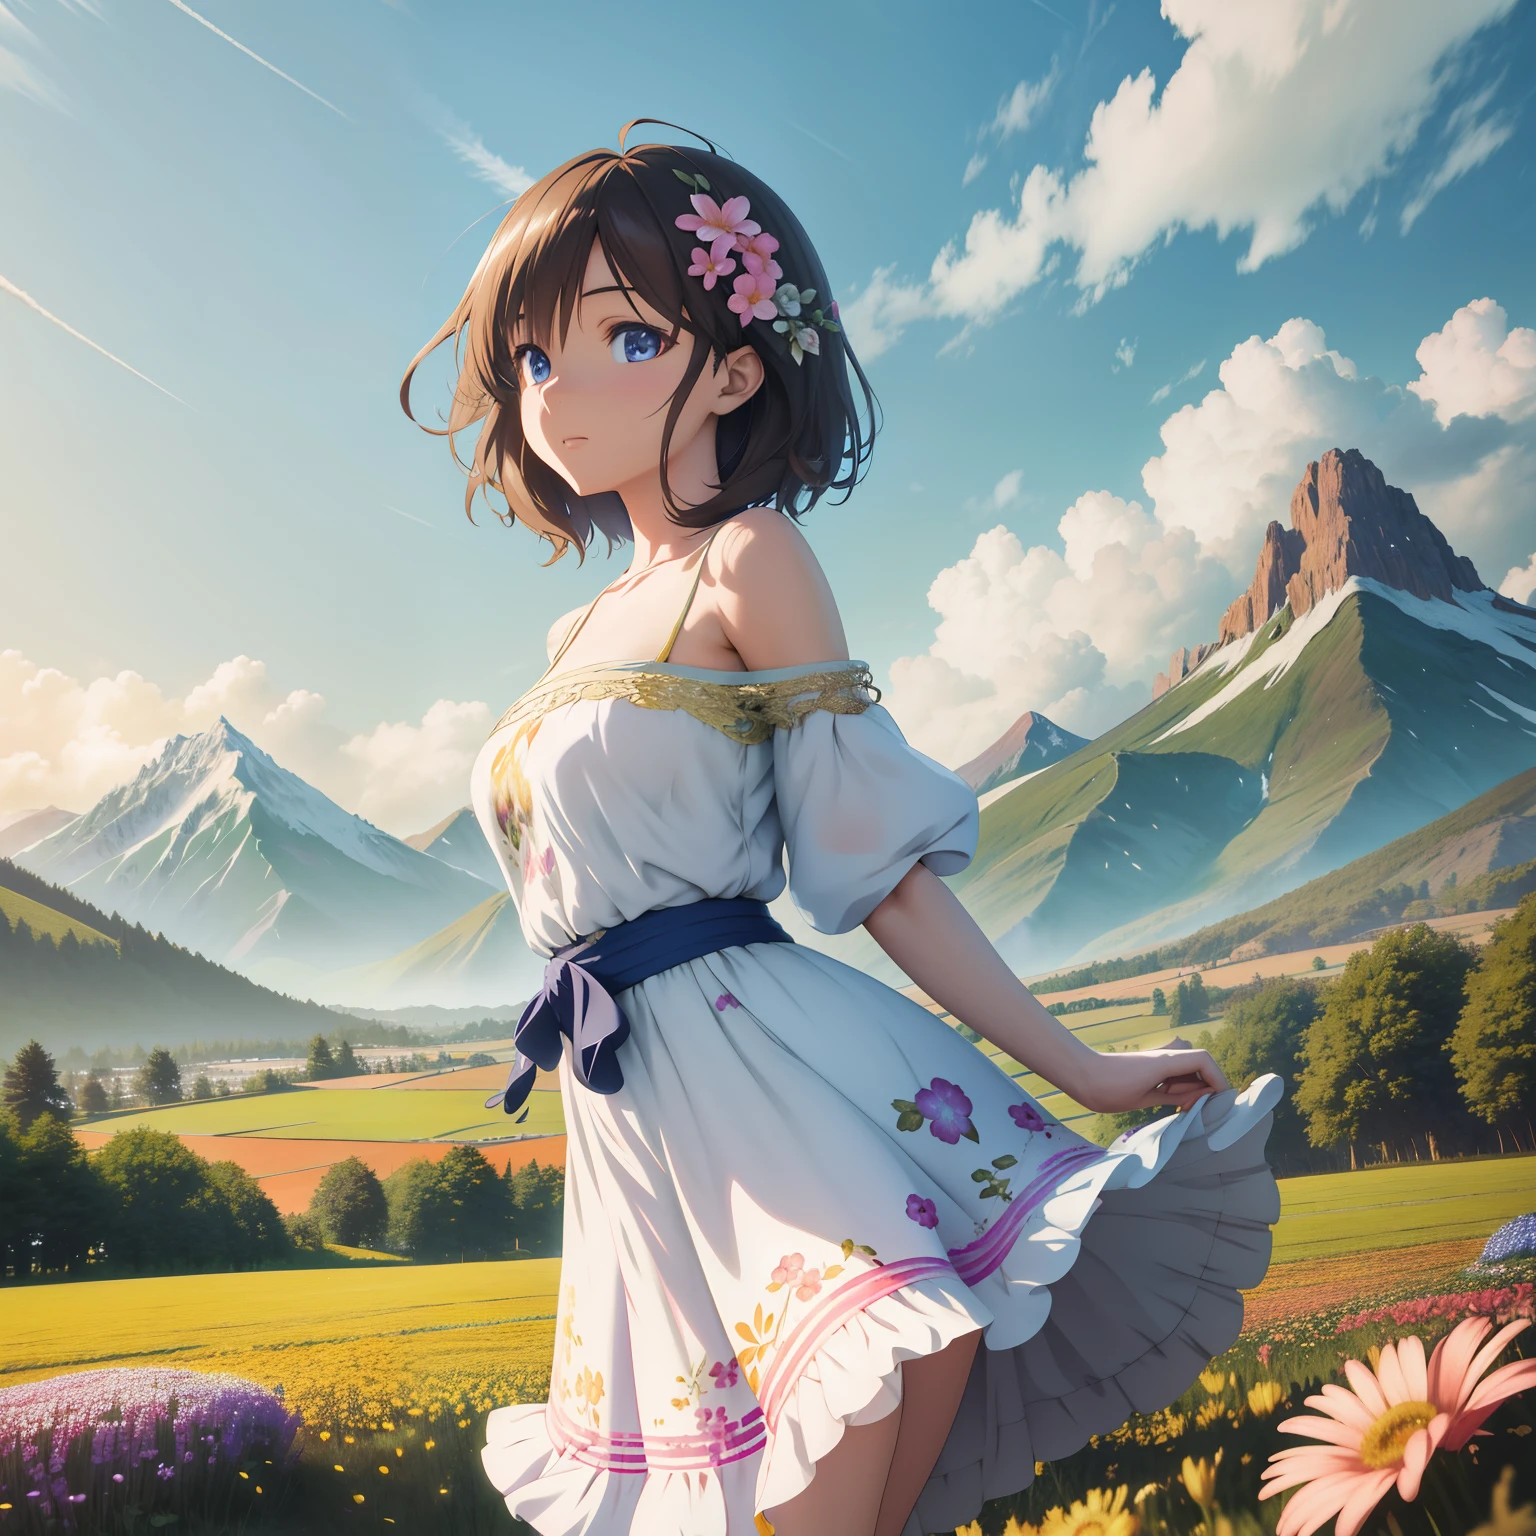 Anime girl in flower field with mountain background, Guviz-style artwork, 2. 5 D CGI anime fantasy artwork, anime styled digital art, Smooth anime CG art, Anime style. 8K, Detailed digital anime art, style of anime4 K, Realistic anime 3 D style, photorealistic anime girl rendering, anime styled 3d